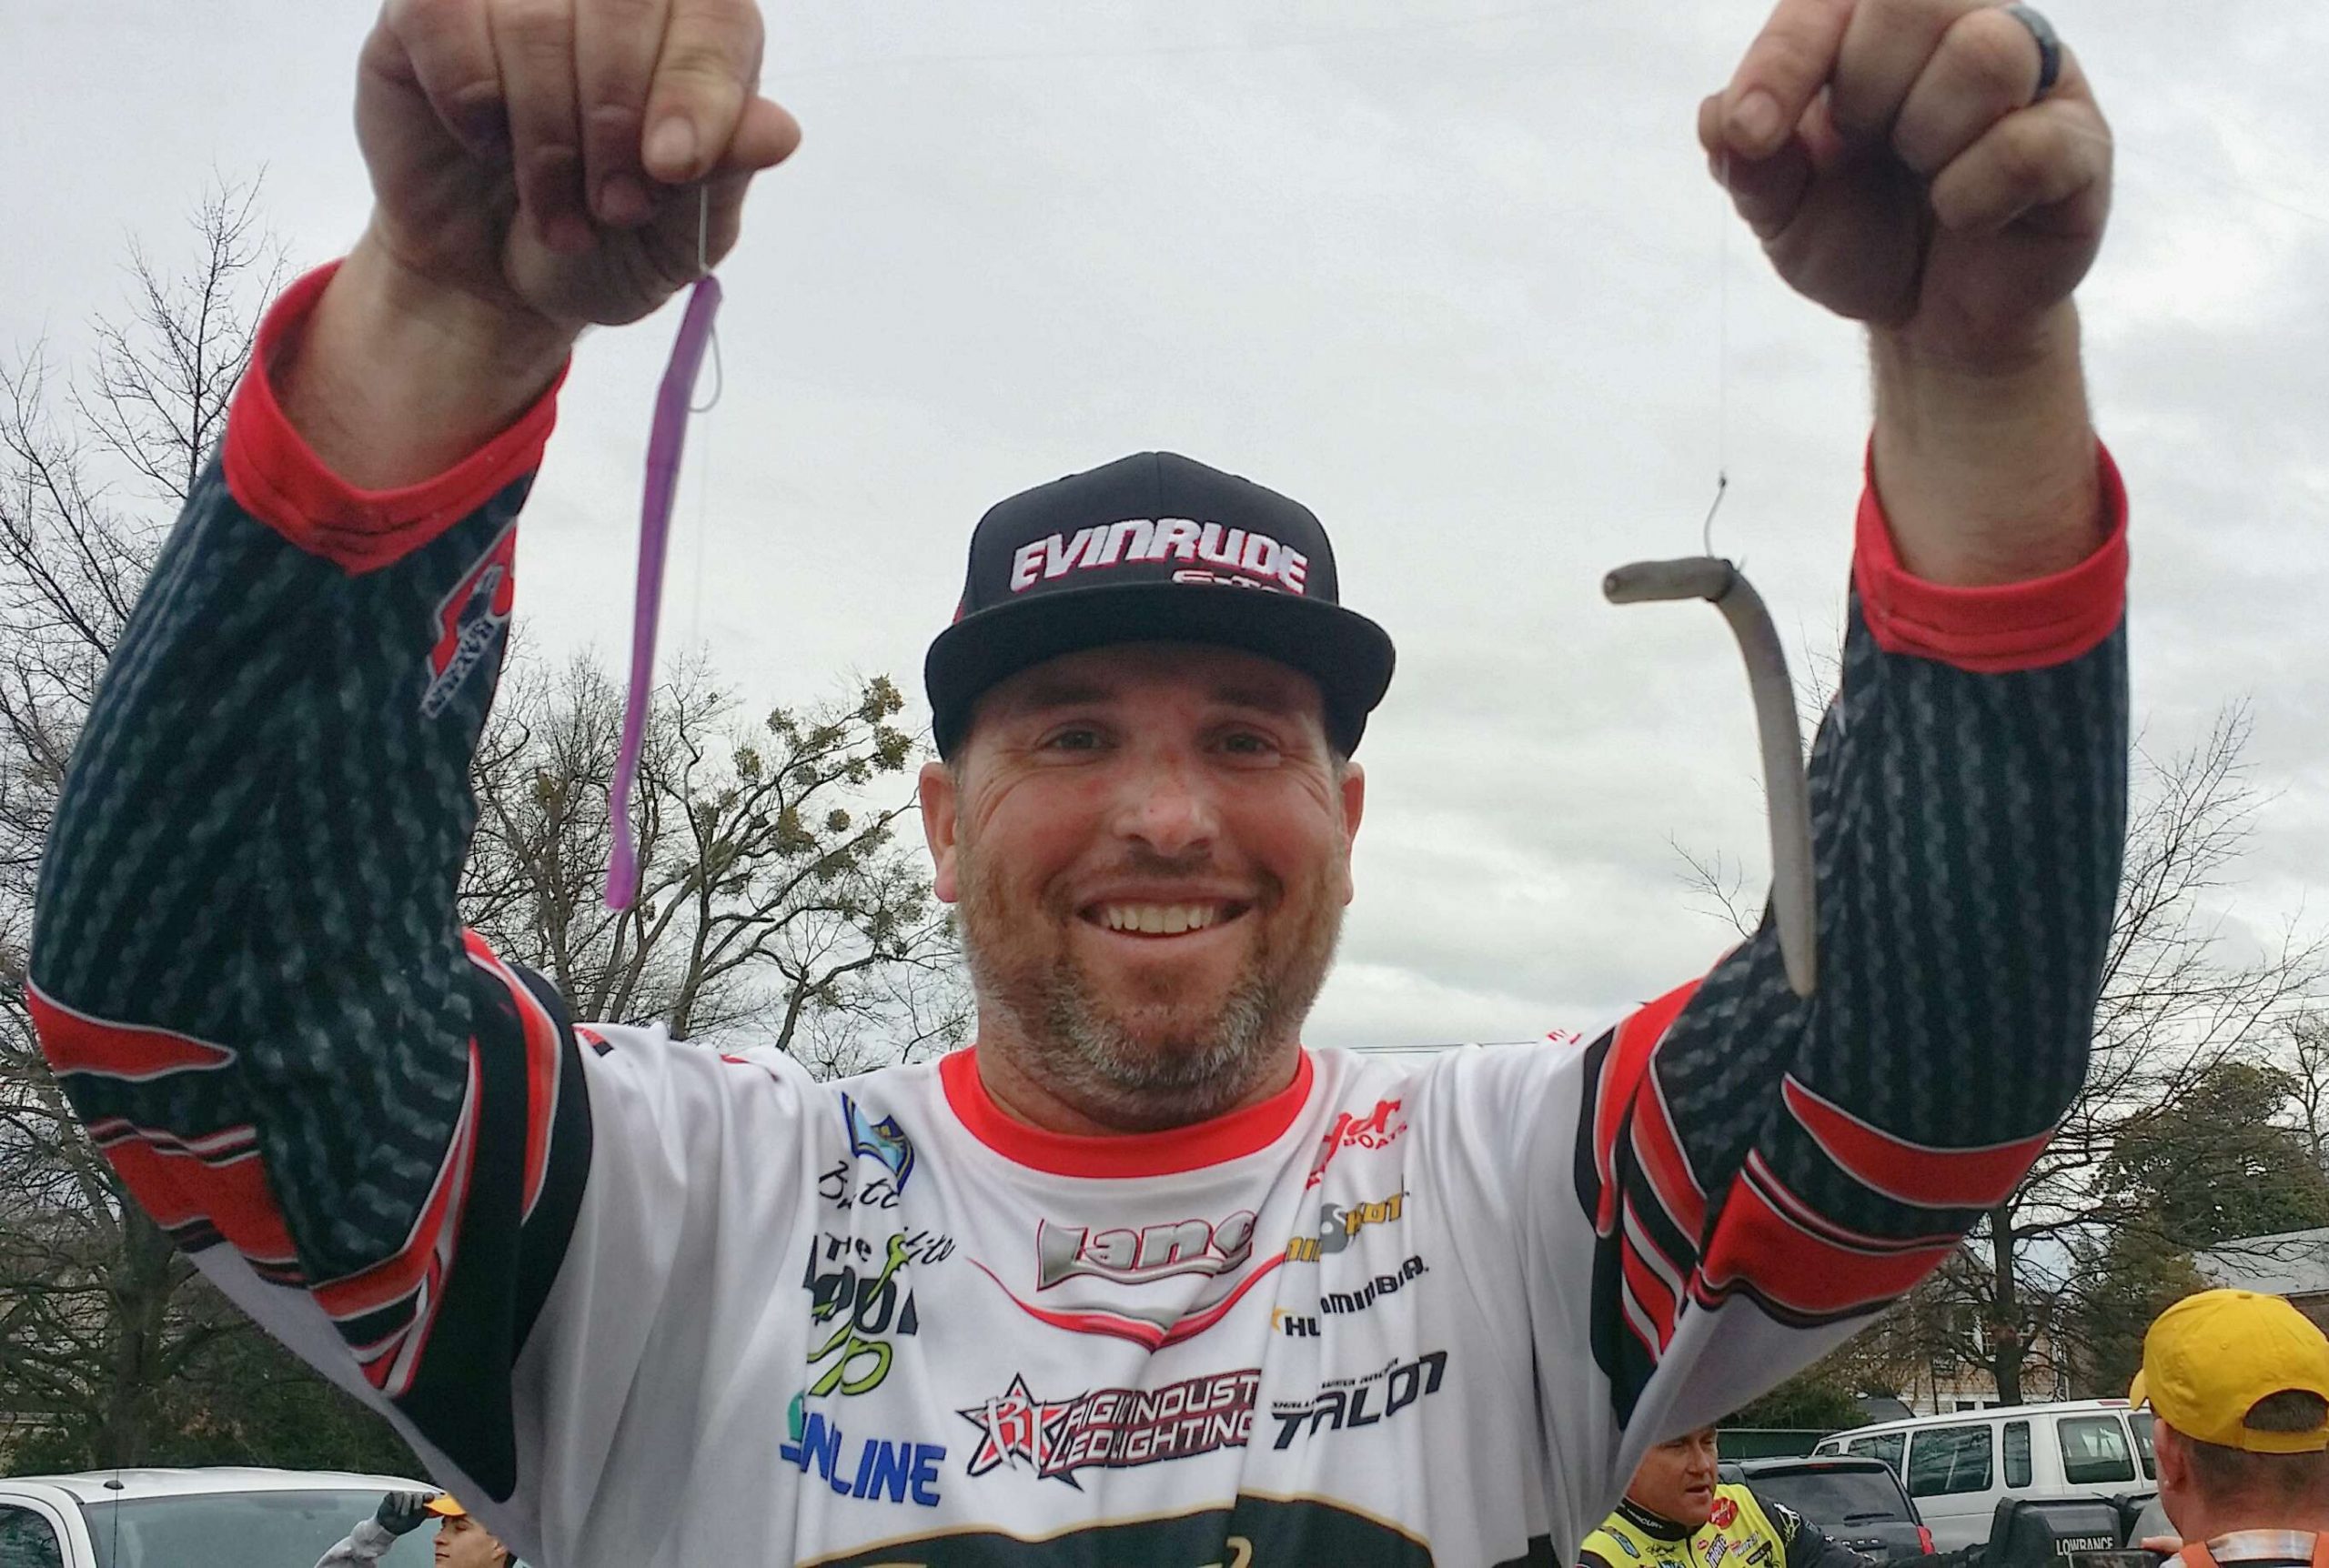 Day 1, Brett Hite's fish came off docks. The next two days they were all from secondary and main lake points with brush, 8-50 feet. He dropshotted a Yamamoto Pro Senko (morning dawn) and a Roboworm (red crawler), and wacky-rigged a Yamamoto Senko (smoke purple/pearl belly, purple/copper and elextric shad) with a tungsten nail weight in the head. Yep, he waited for that Senko to drop all the way down, but said it didn't take that long. He saw most of his fish on his electronics.